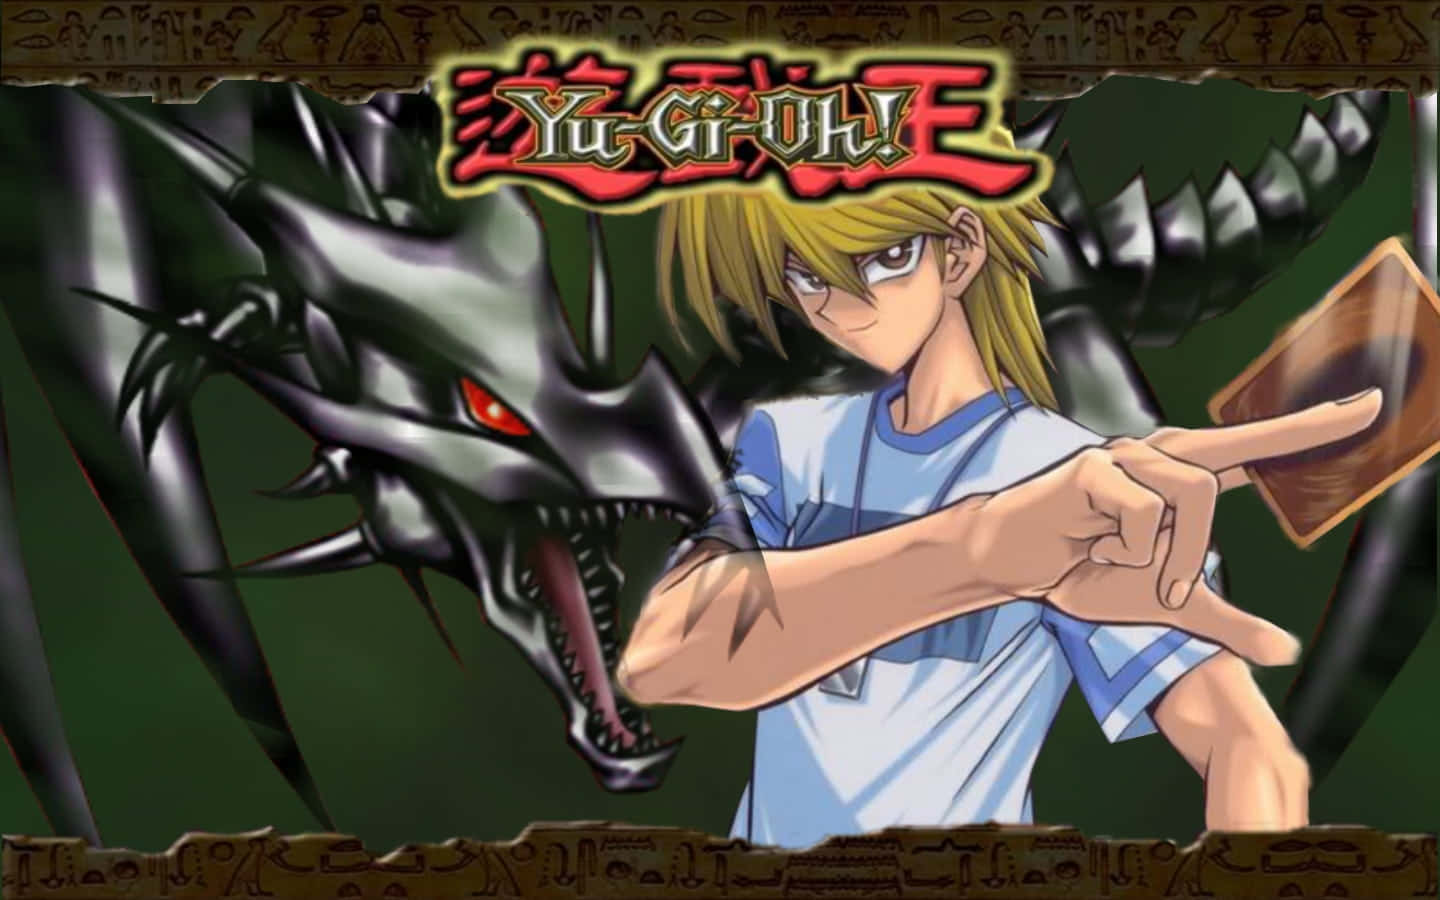 Joey Wheeler, a beloved character from the Yu-Gi-Oh! series, striking a confident pose. Wallpaper